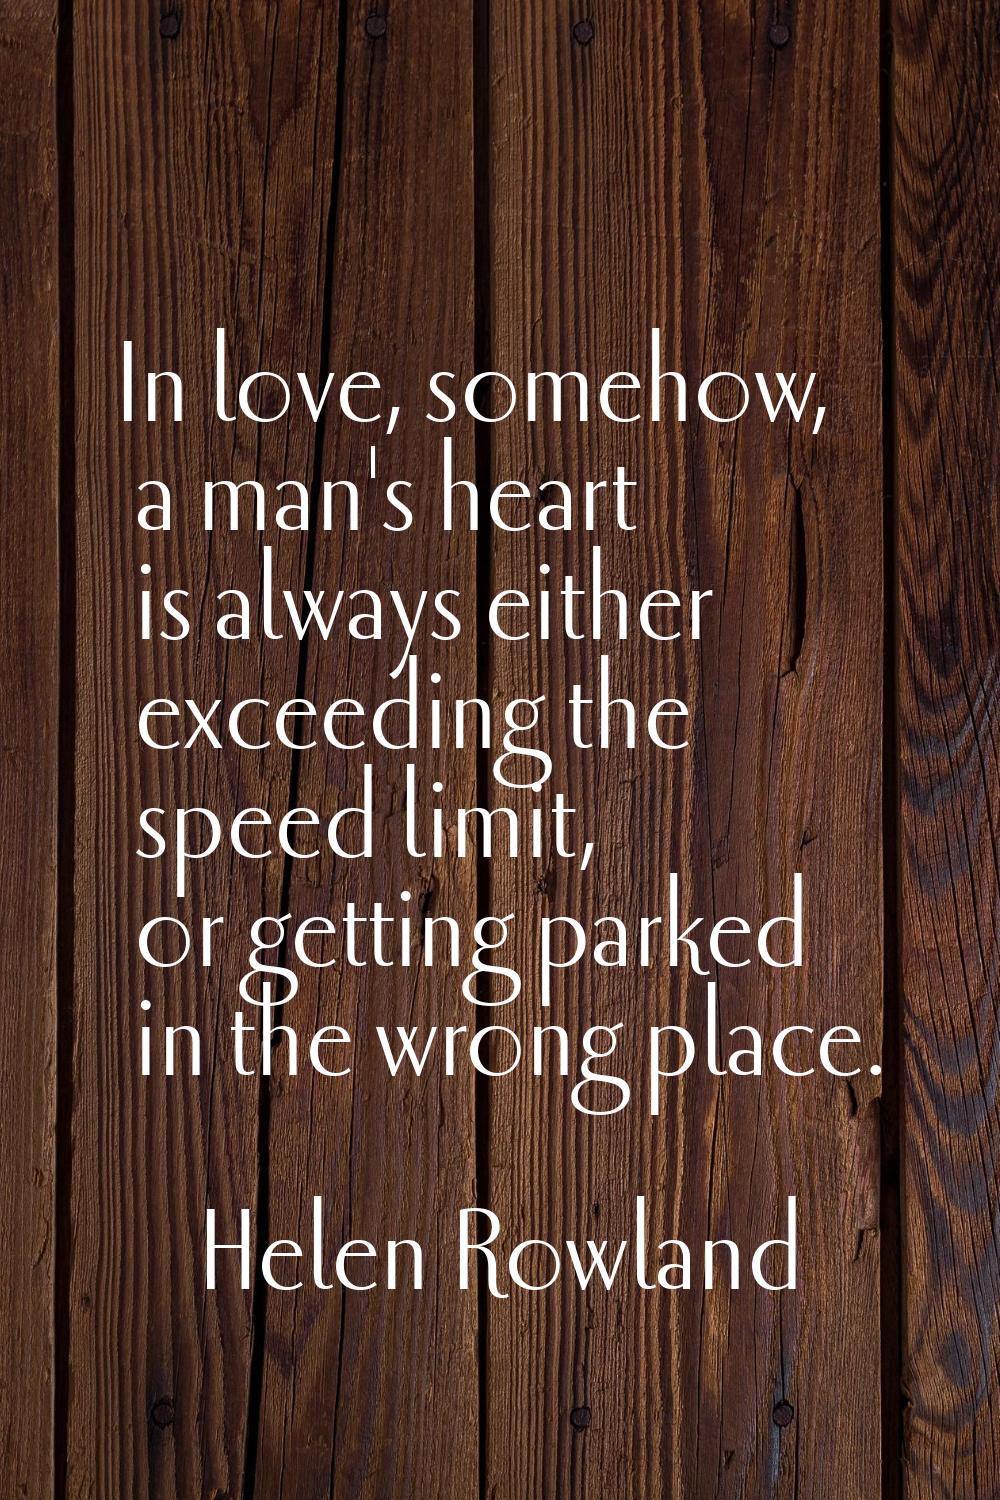 In love, somehow, a man's heart is always either exceeding the speed limit, or getting parked in th